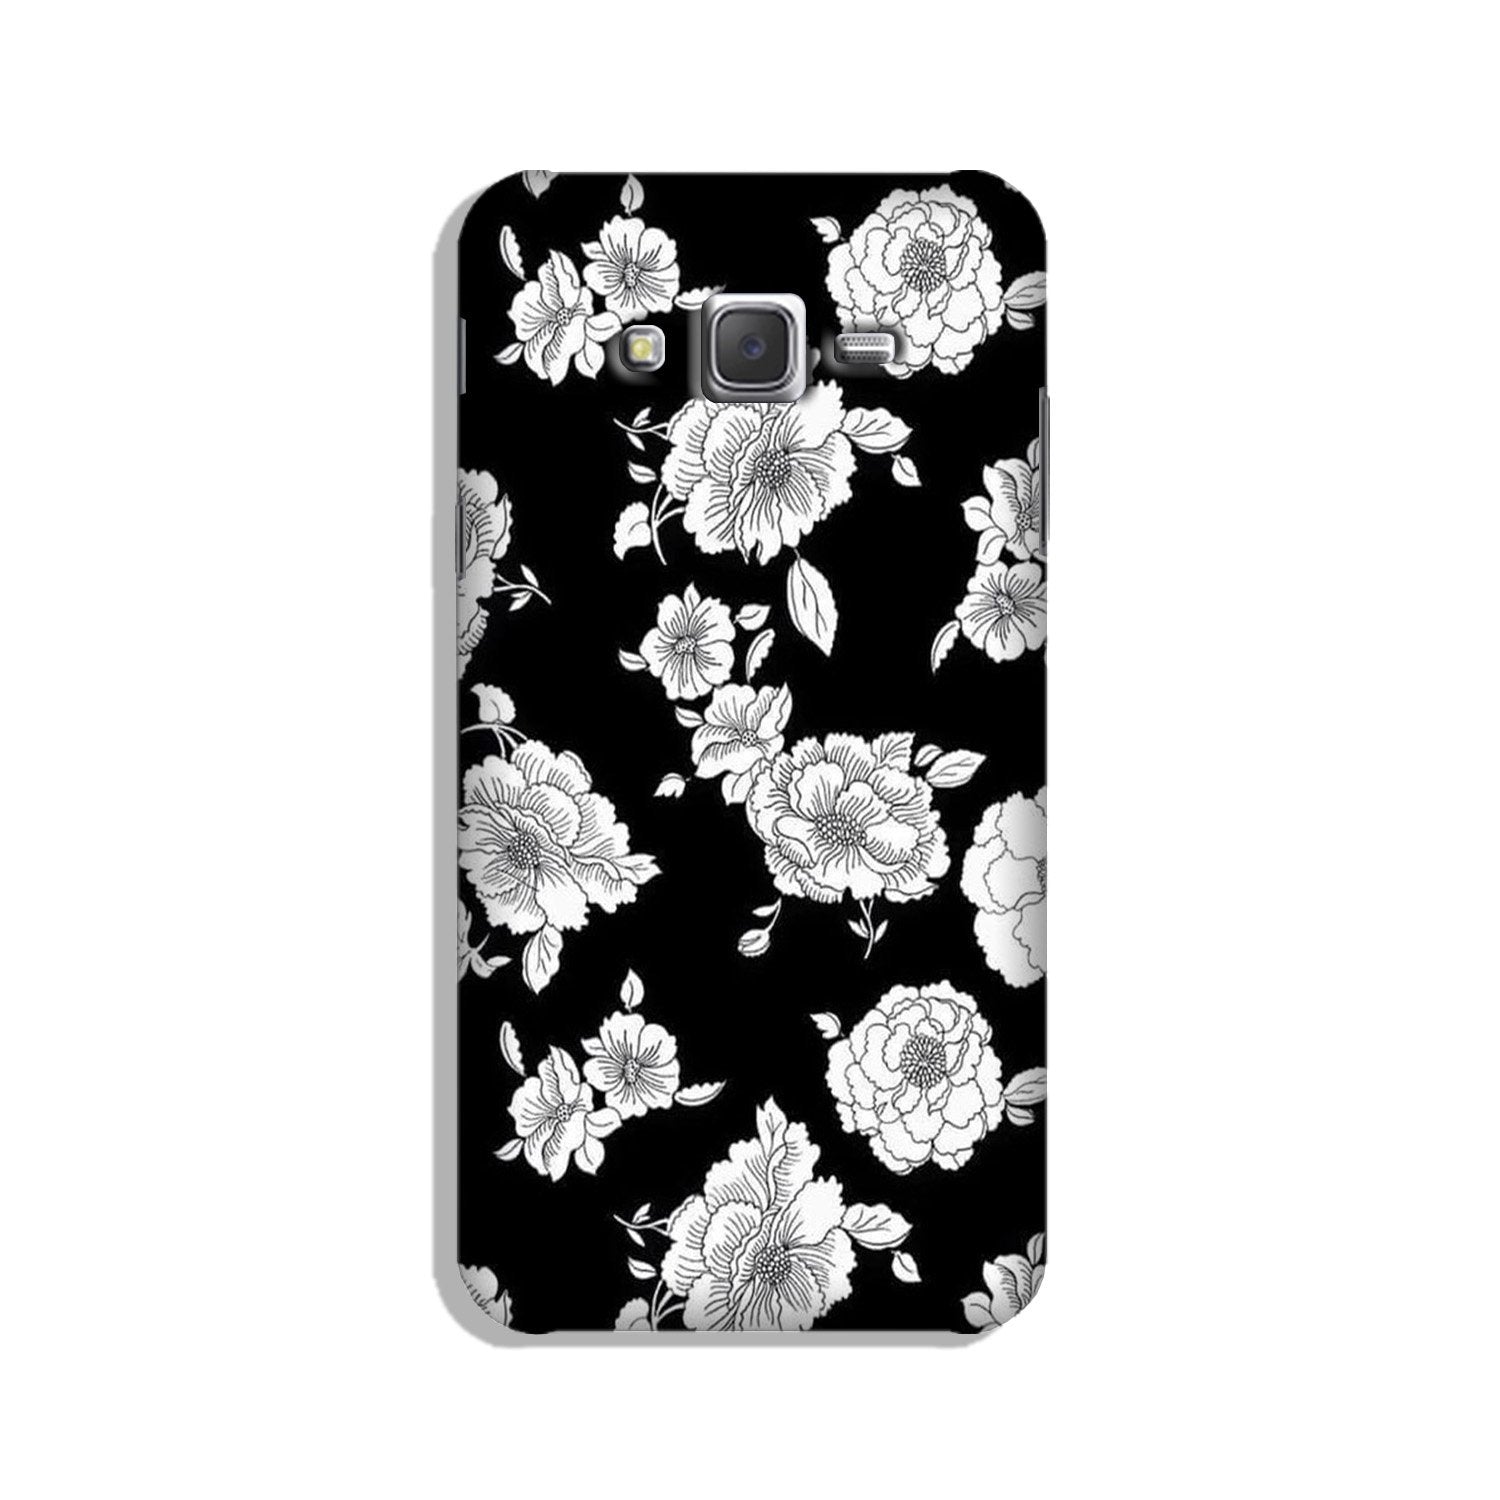 White flowers Black Background Case for Galaxy J2 (2015)